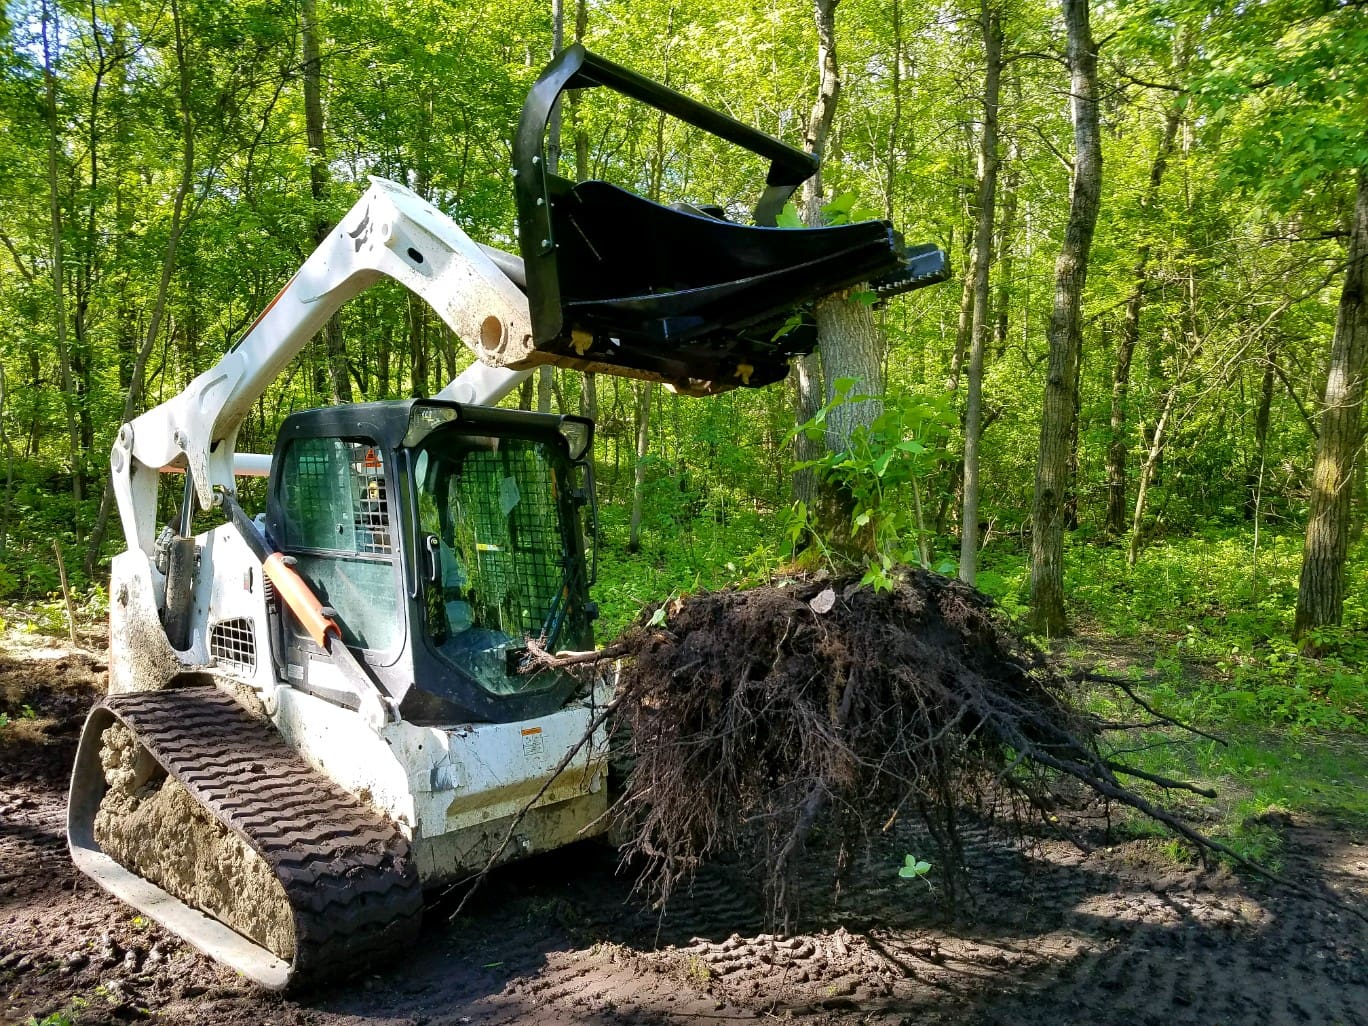 The Best skid steer attachments for landscaping work